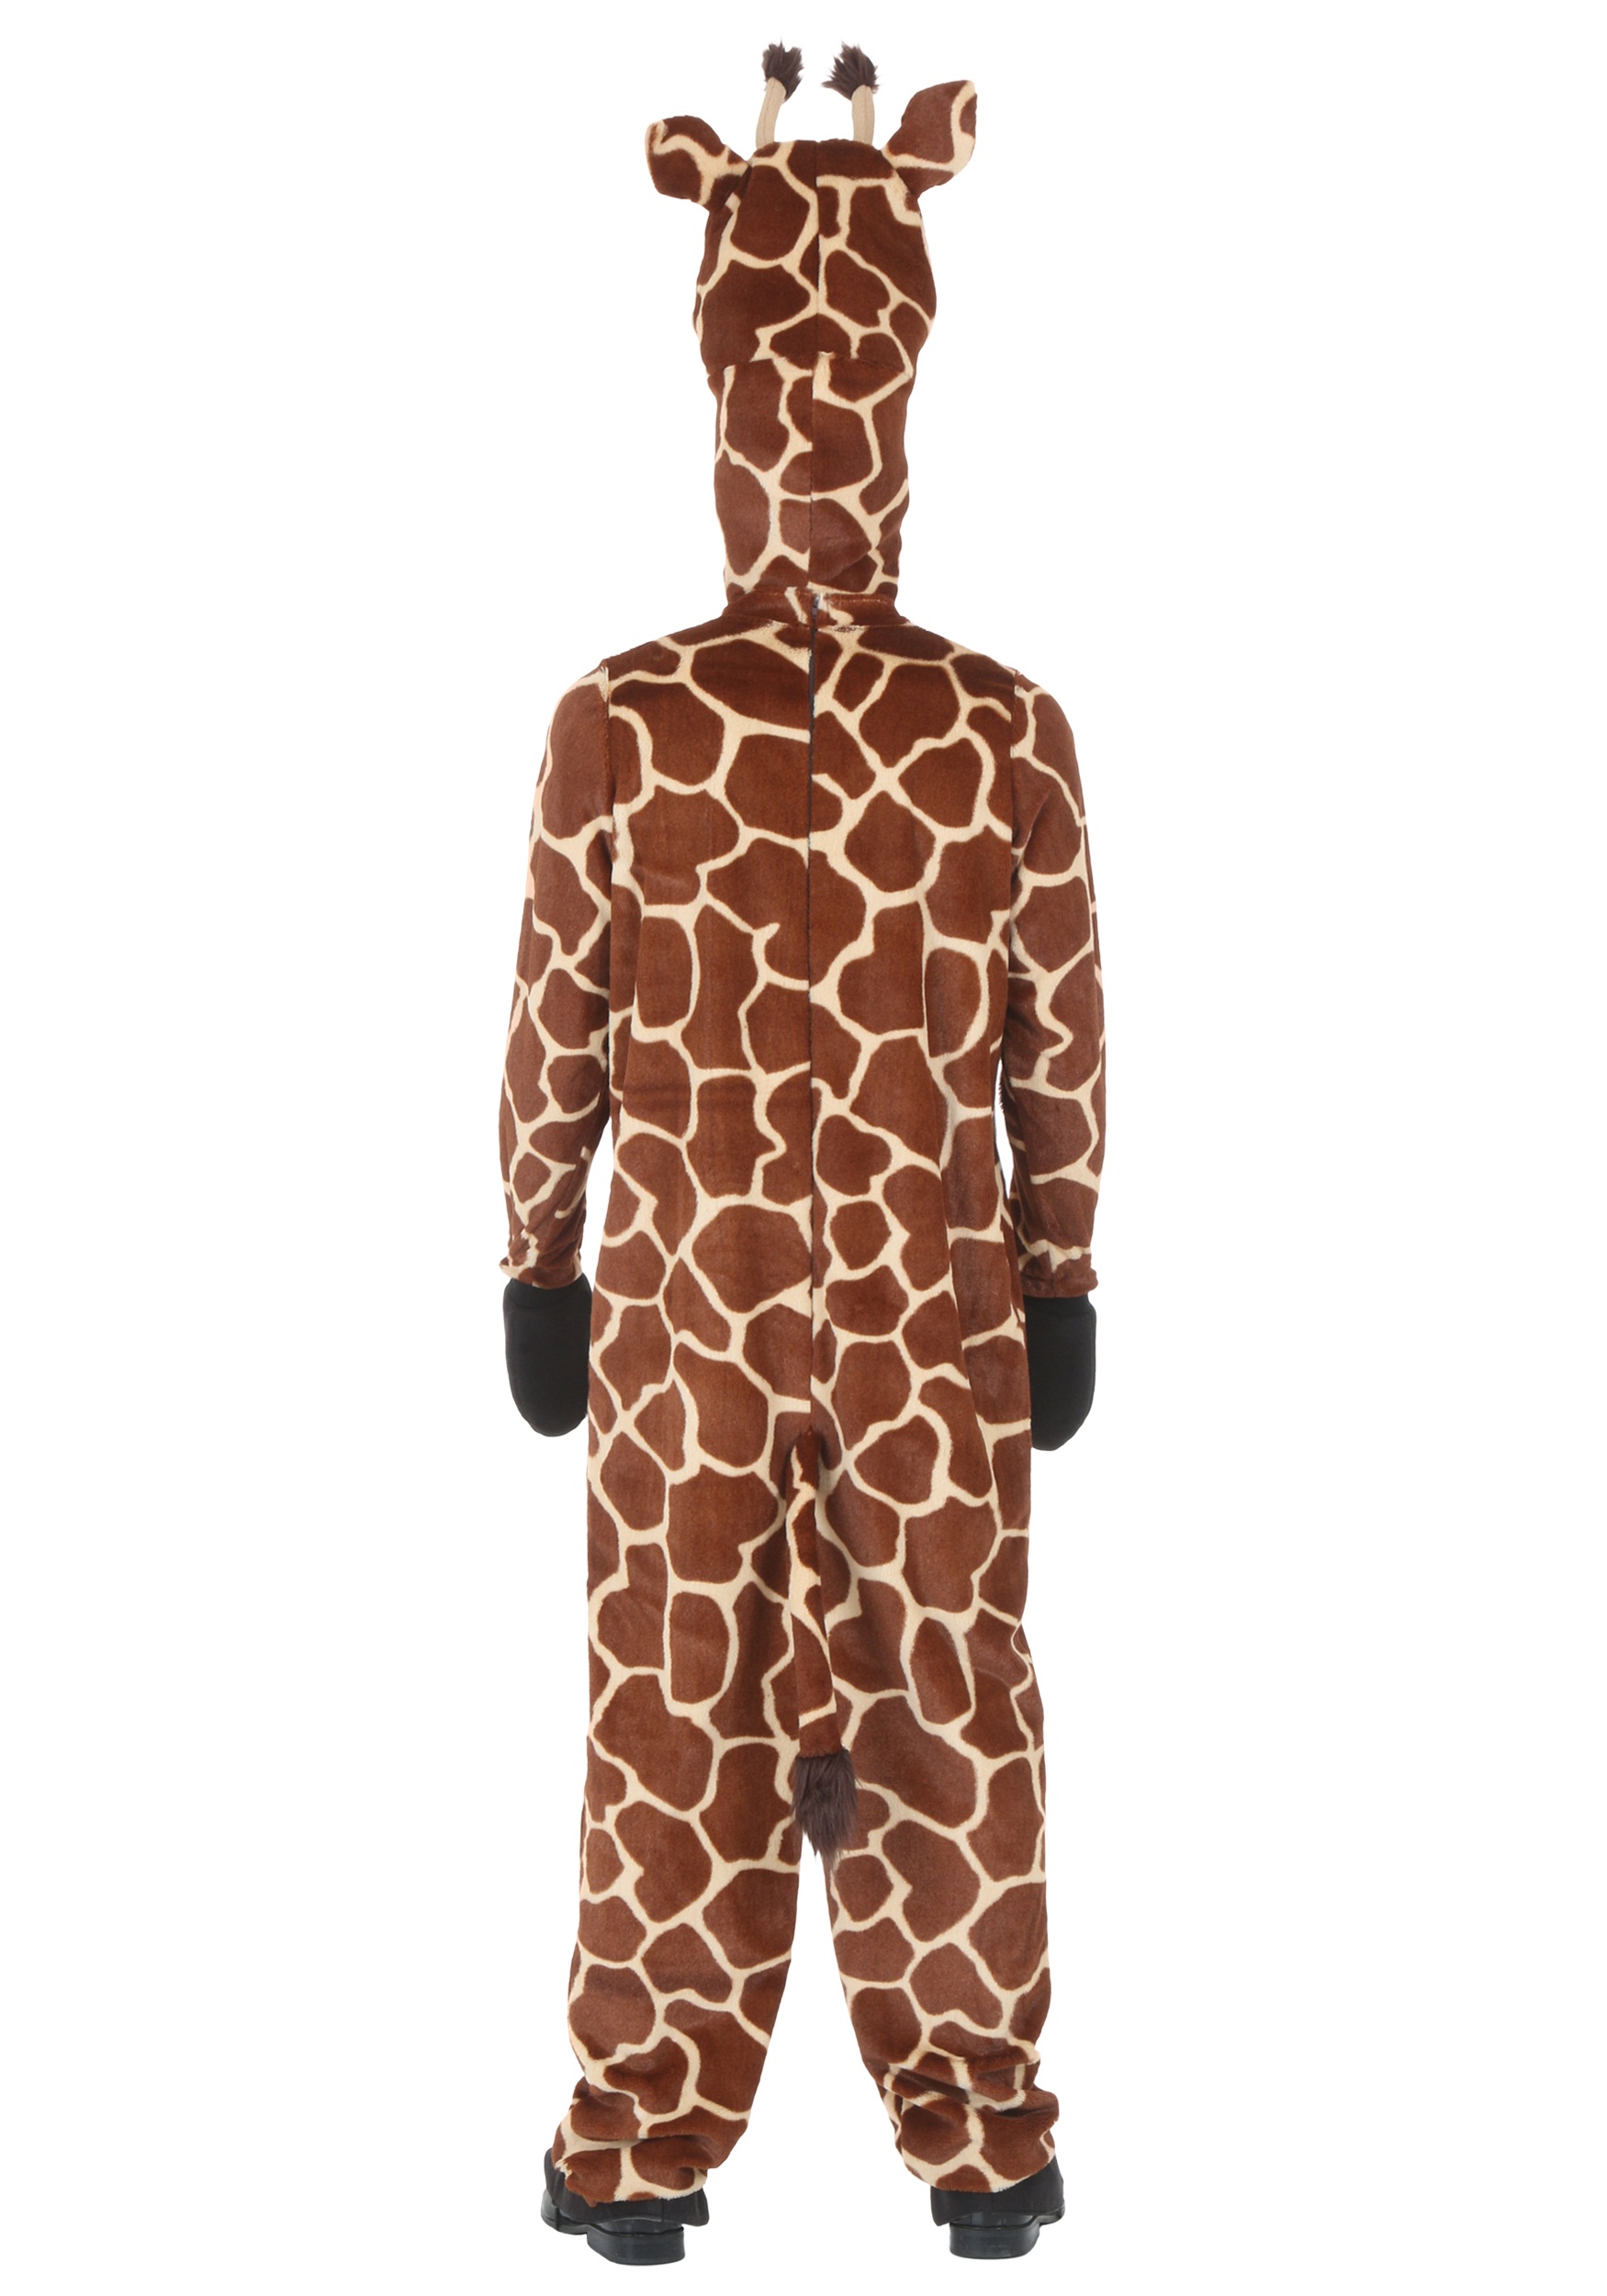 Giraffe All In One Adults Mens Ladies Fancy Dress Animal Giraffe Outfit Med 